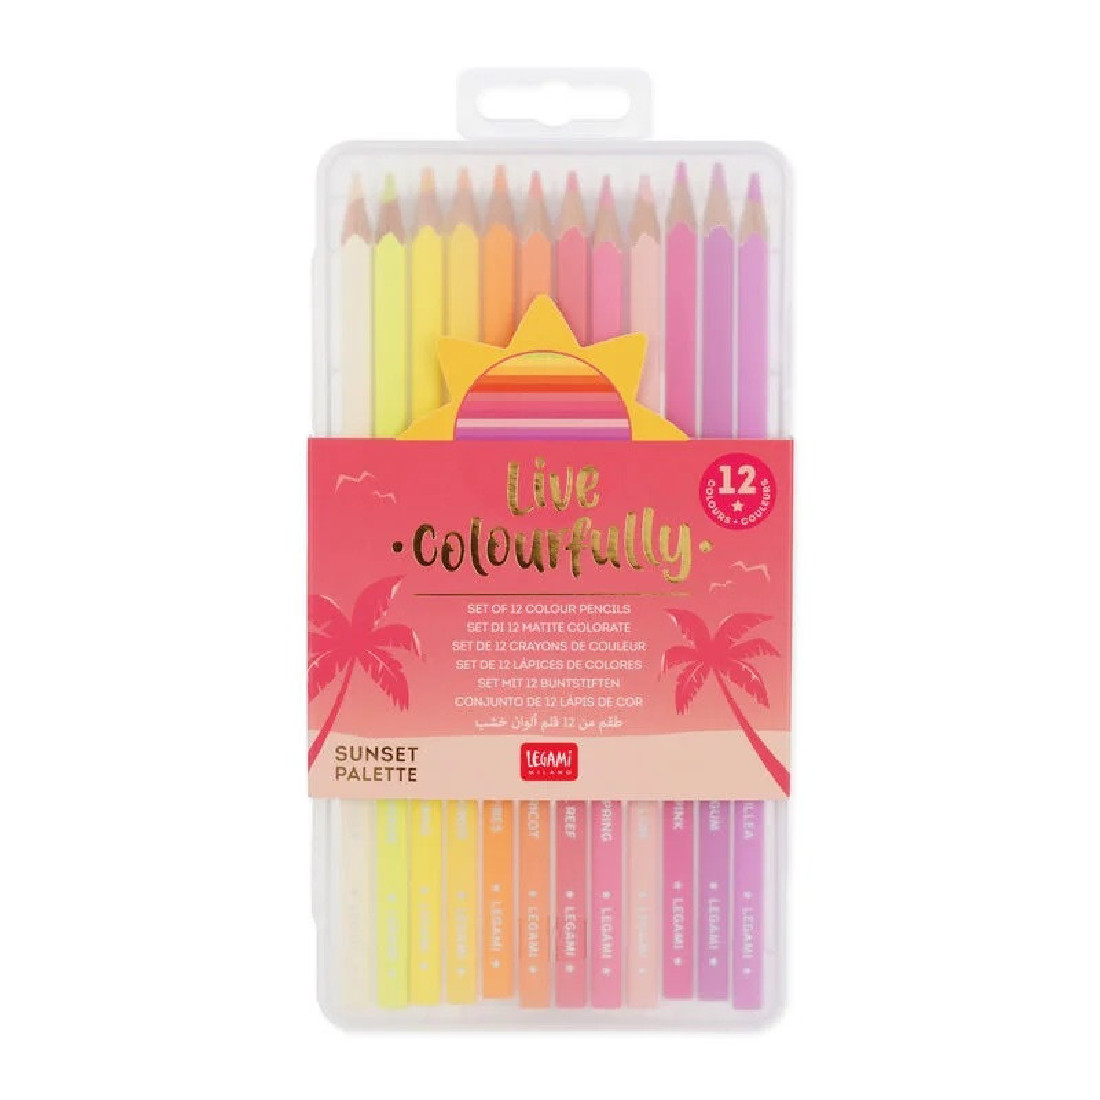 Set of 12 Colouring Pencils - Live Colourfully ( Sunset palette ) Legami